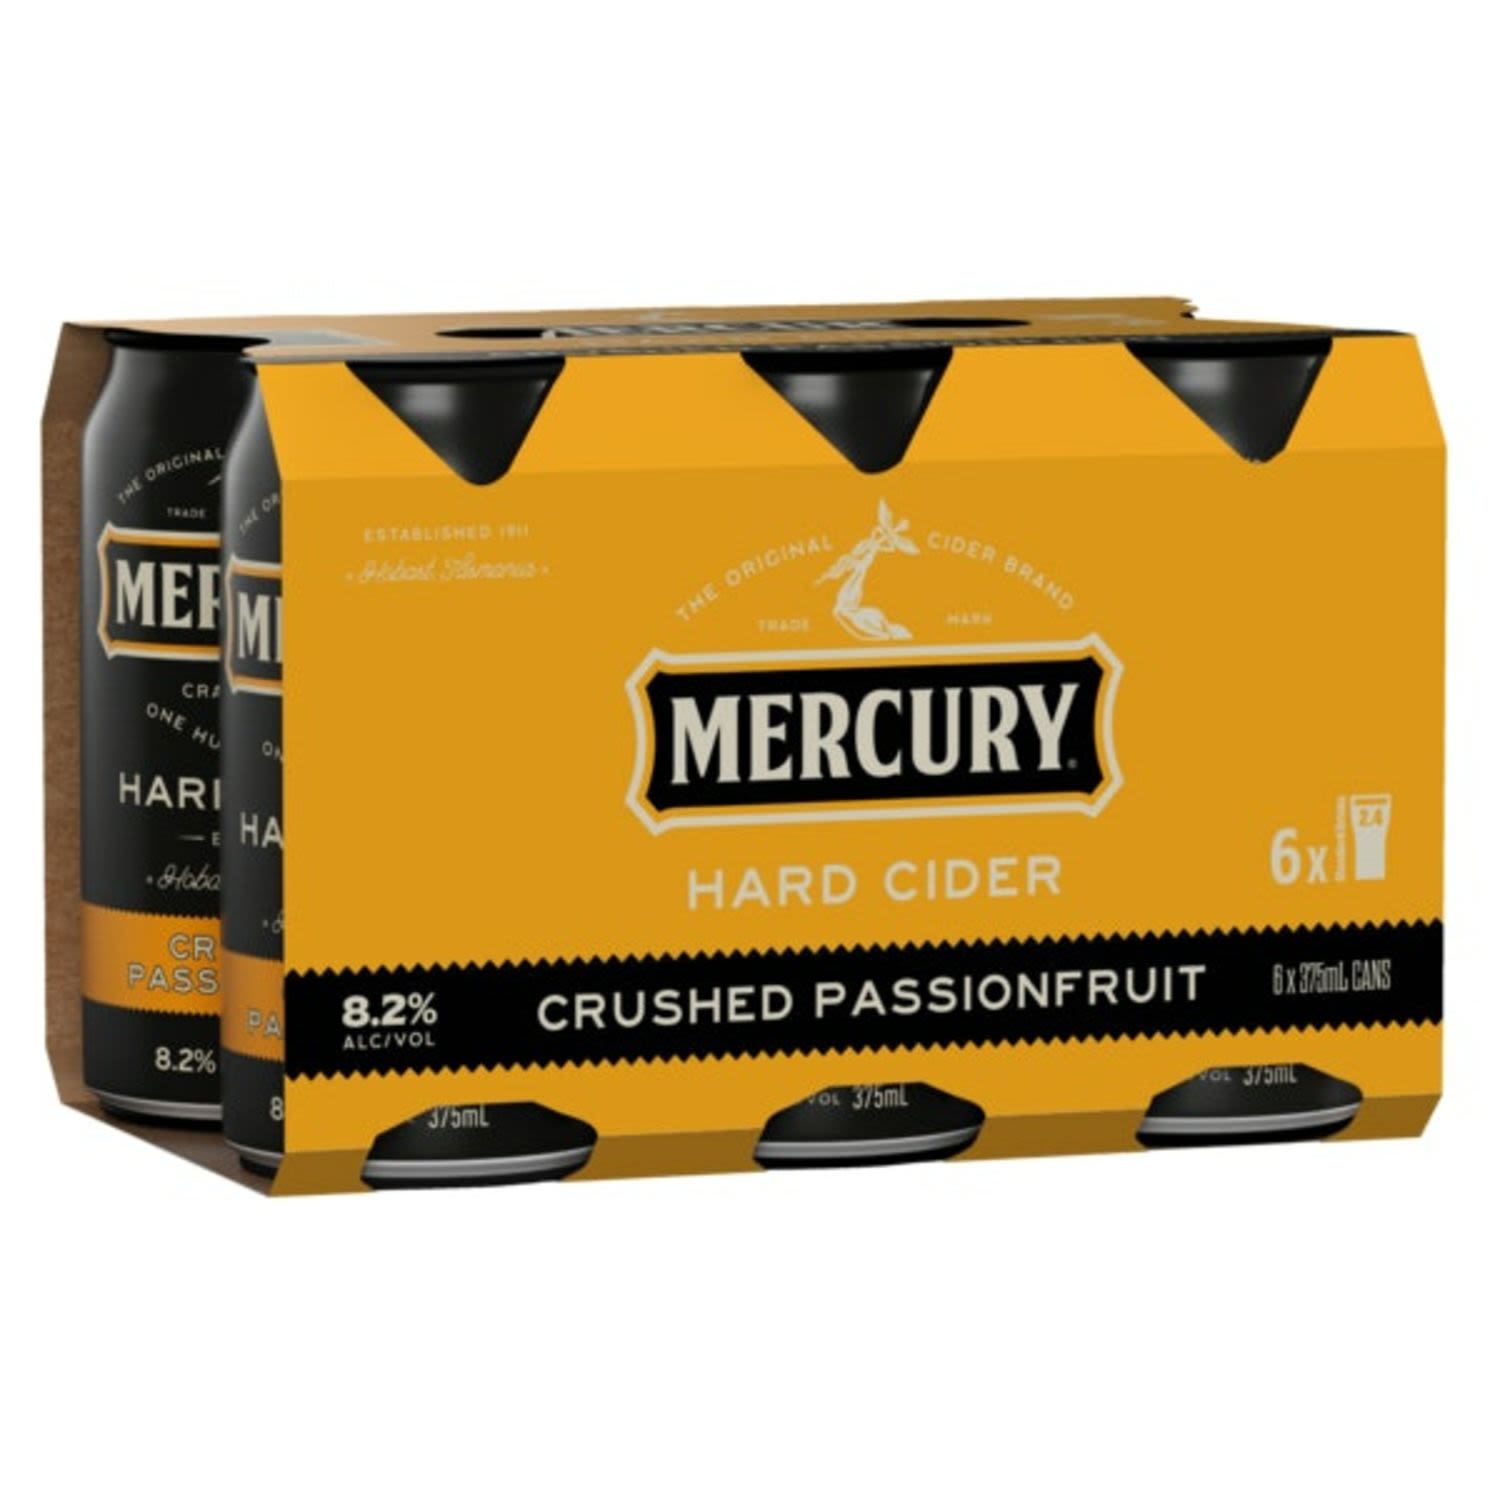 Fermented with real passionfruit to create a delicate passionfruit aroma and subtle but noticeable flavour on the palate. Pleasantly balanced with an upfront refreshing tartness and smooth finish.<br /> <br />Alcohol Volume: 8.20%<br /><br />Pack Format: 6 Pack<br /><br />Standard Drinks: 2.4<br /><br />Pack Type: Can<br /><br />Country of Origin: Australia<br />